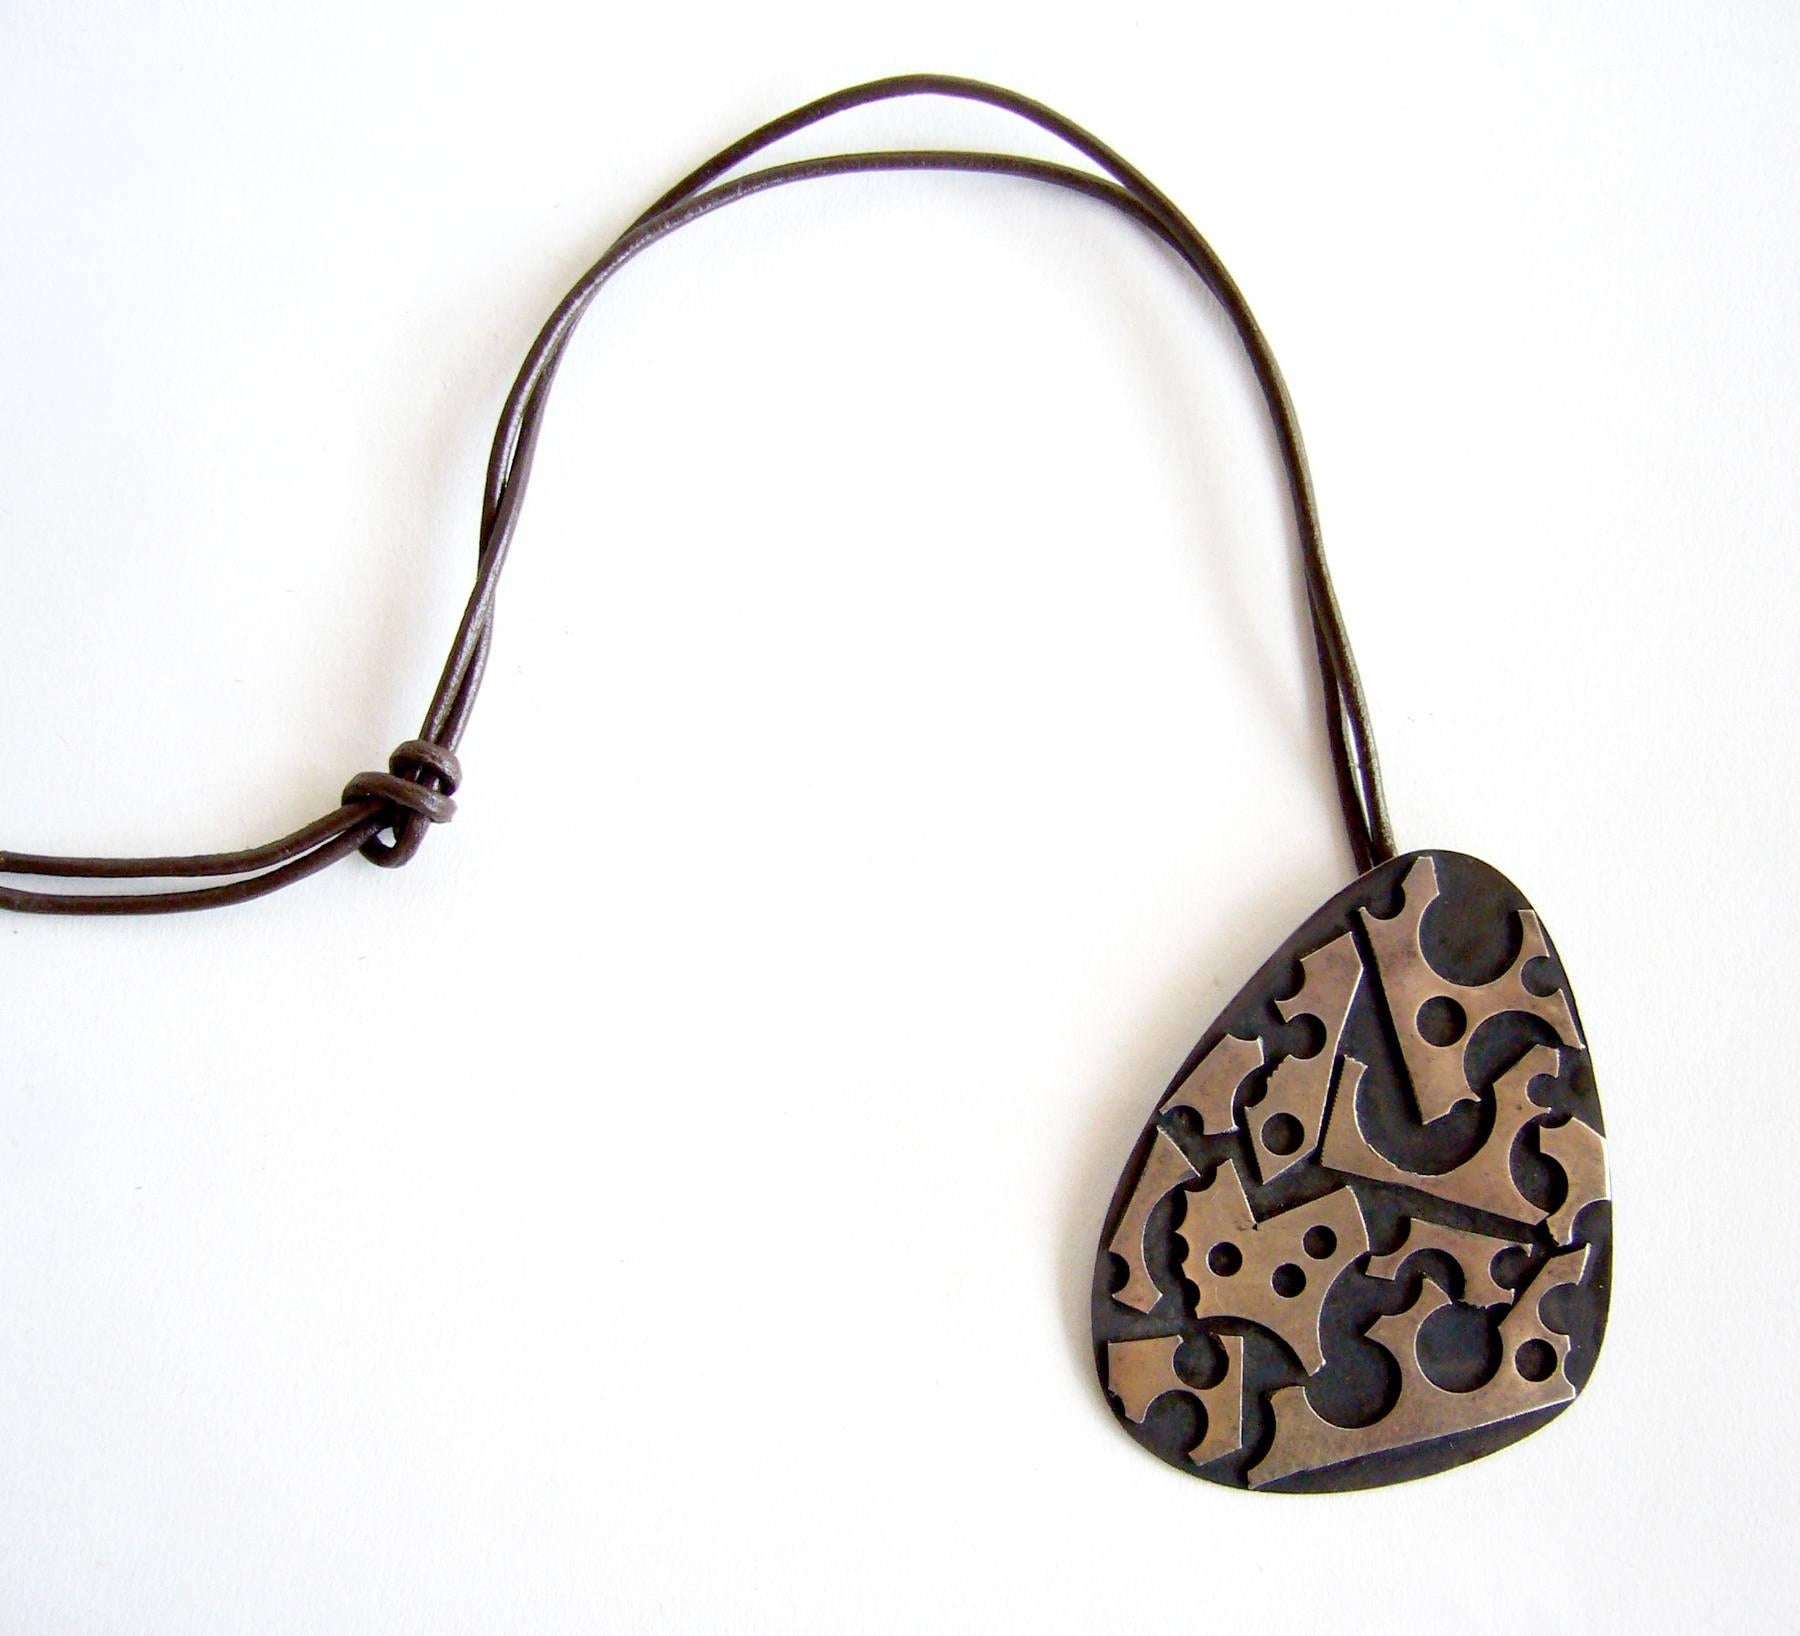 Oxidized sterling silver pendant created by silversmith James Parker of San Diego, California.  Parker was an early member of the Allied Craftsmen of San Diego which started in the 1940's.  His jewelry was featured in the show 